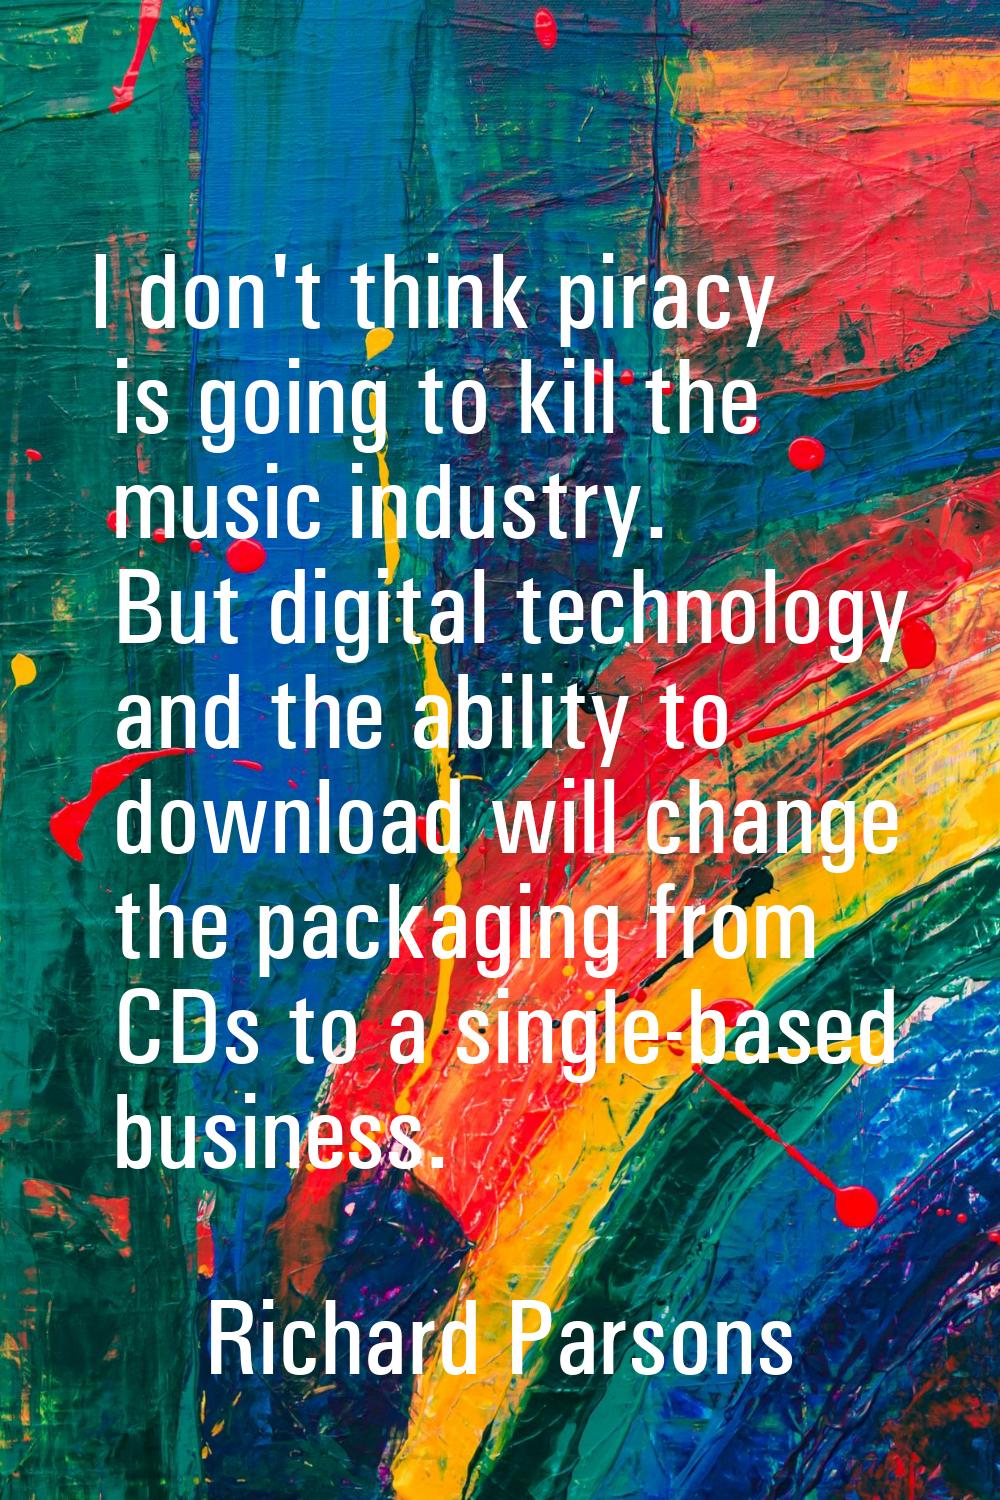 I don't think piracy is going to kill the music industry. But digital technology and the ability to